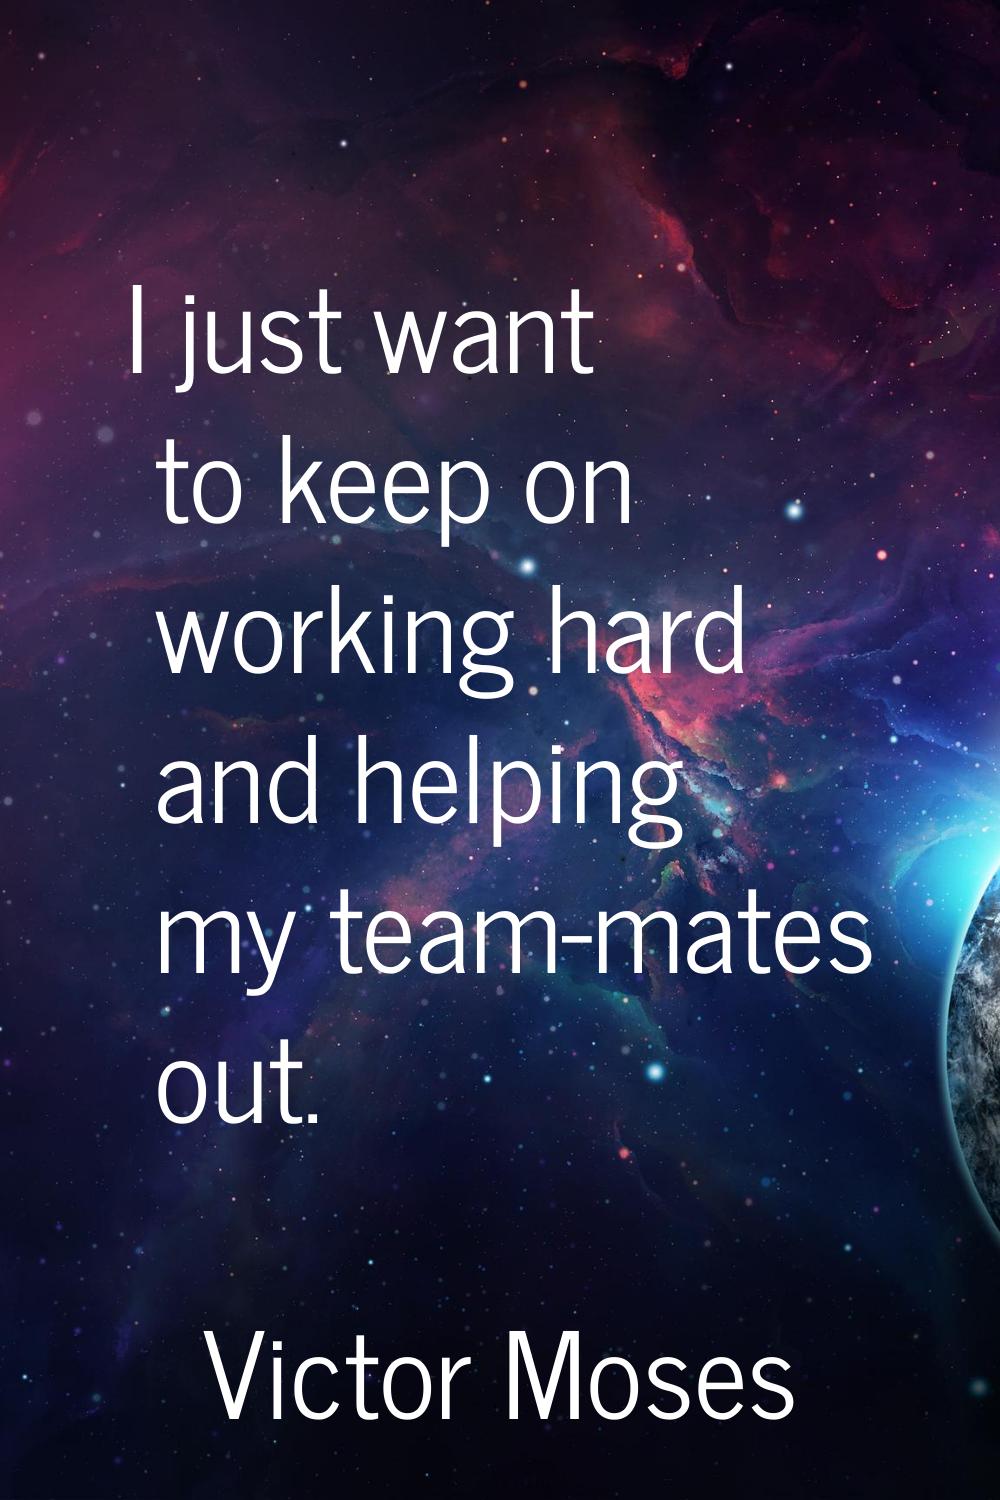 I just want to keep on working hard and helping my team-mates out.